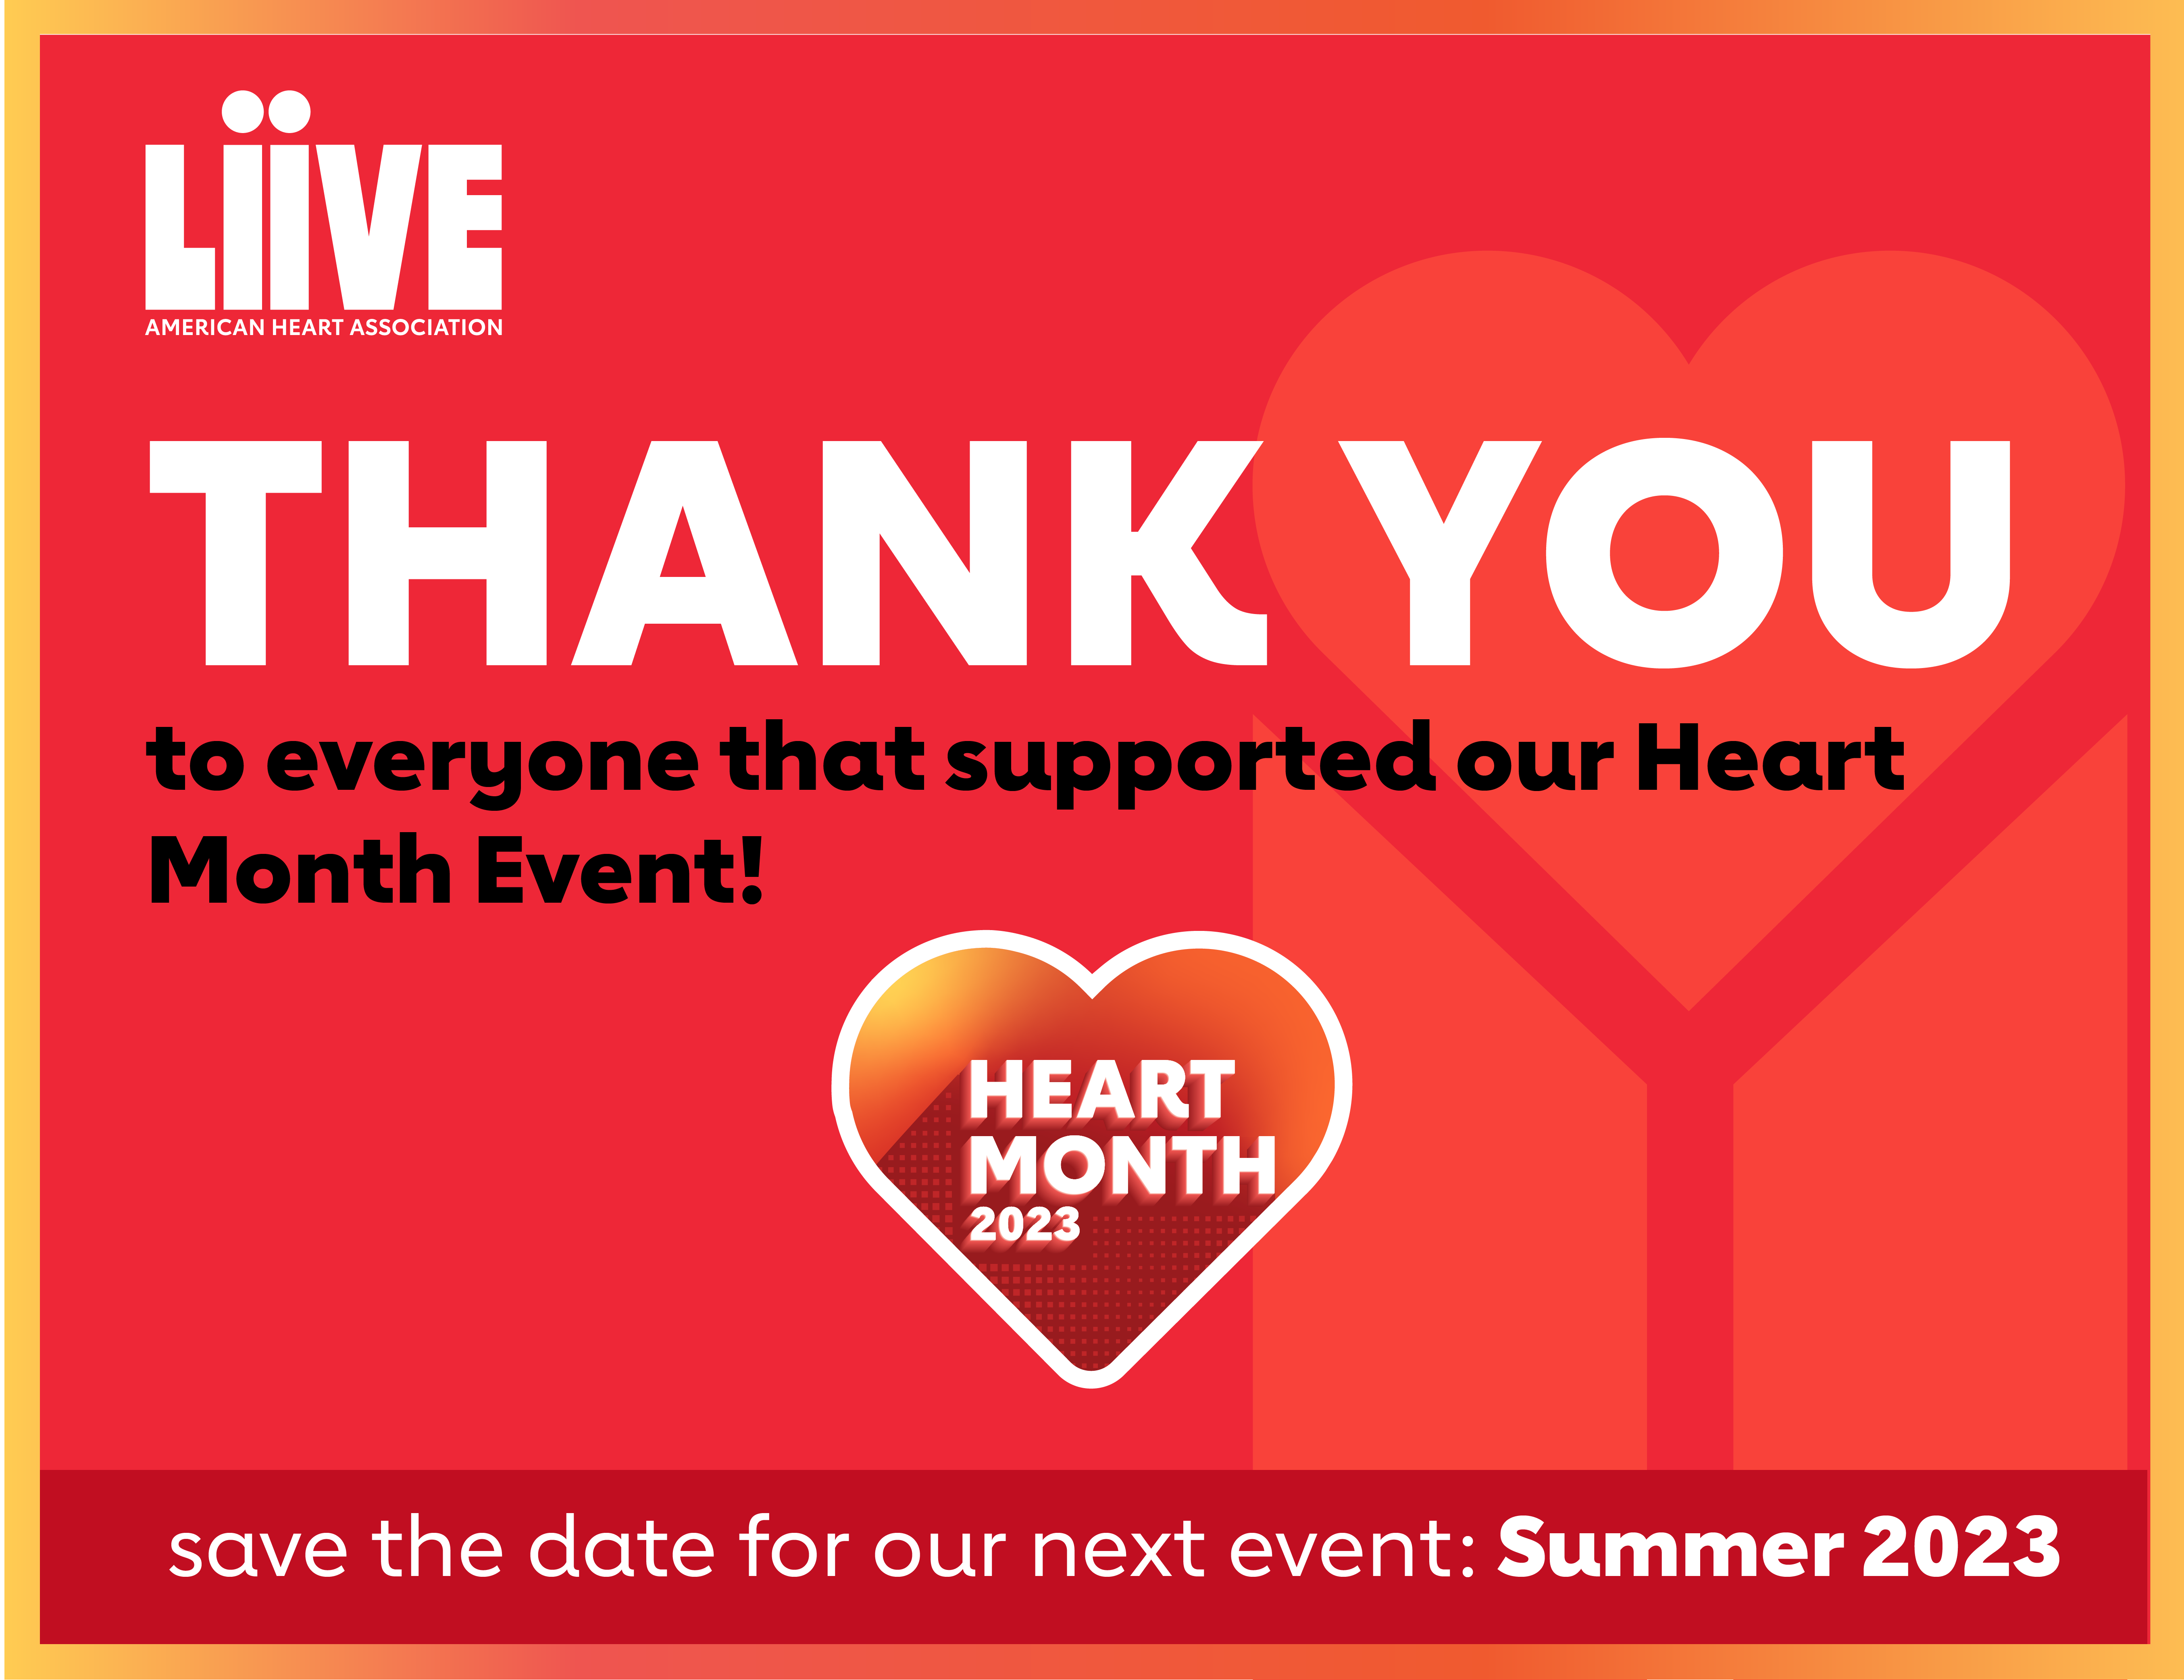 Thank You to everyone that supported our Heart Month Event. Save the date for the next event: Summer 2023